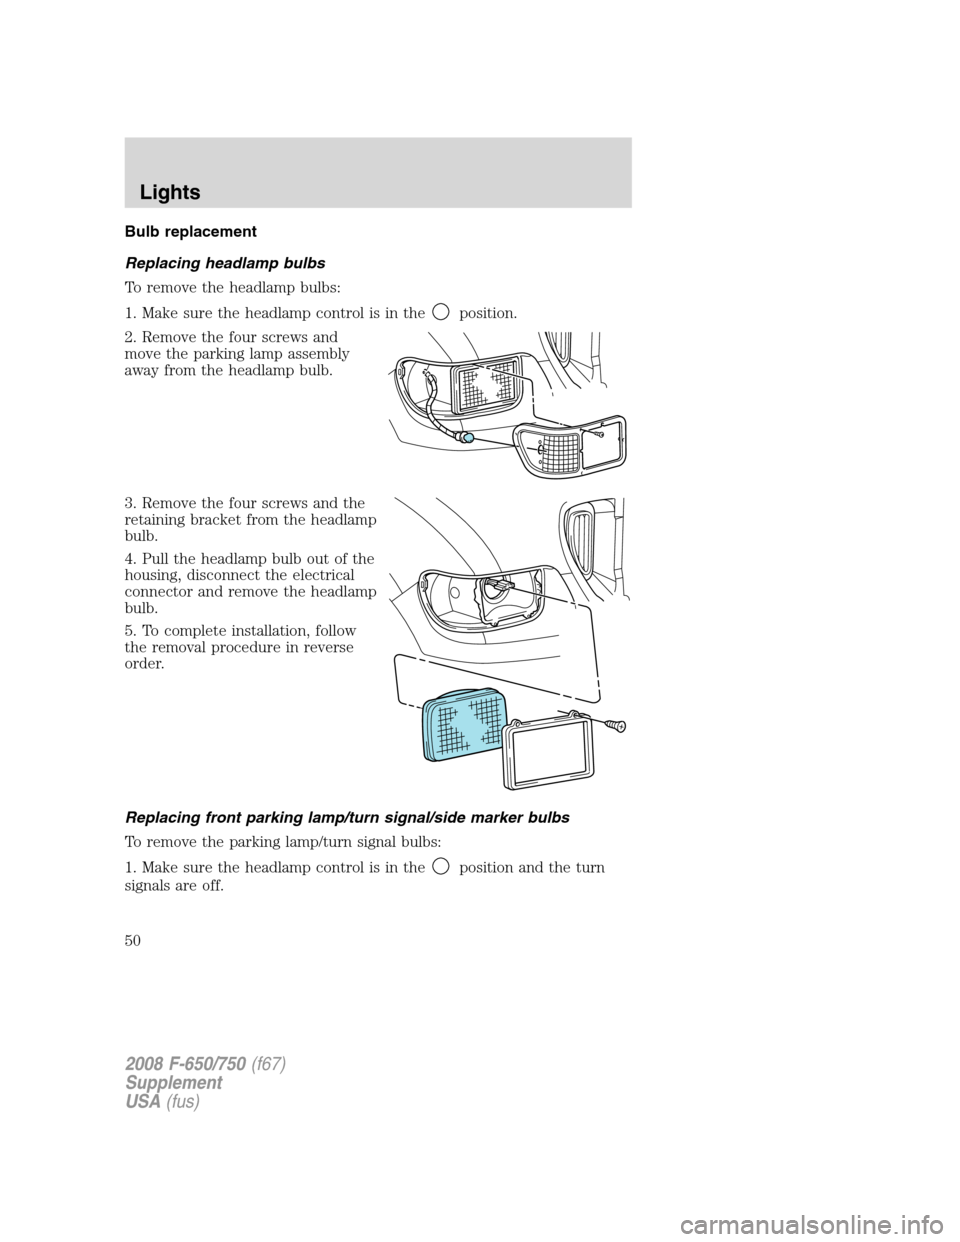 FORD F650 2008 11.G Owners Manual Bulb replacement
Replacing headlamp bulbs
To remove the headlamp bulbs:
1. Make sure the headlamp control is in the
position.
2. Remove the four screws and
move the parking lamp assembly
away from the